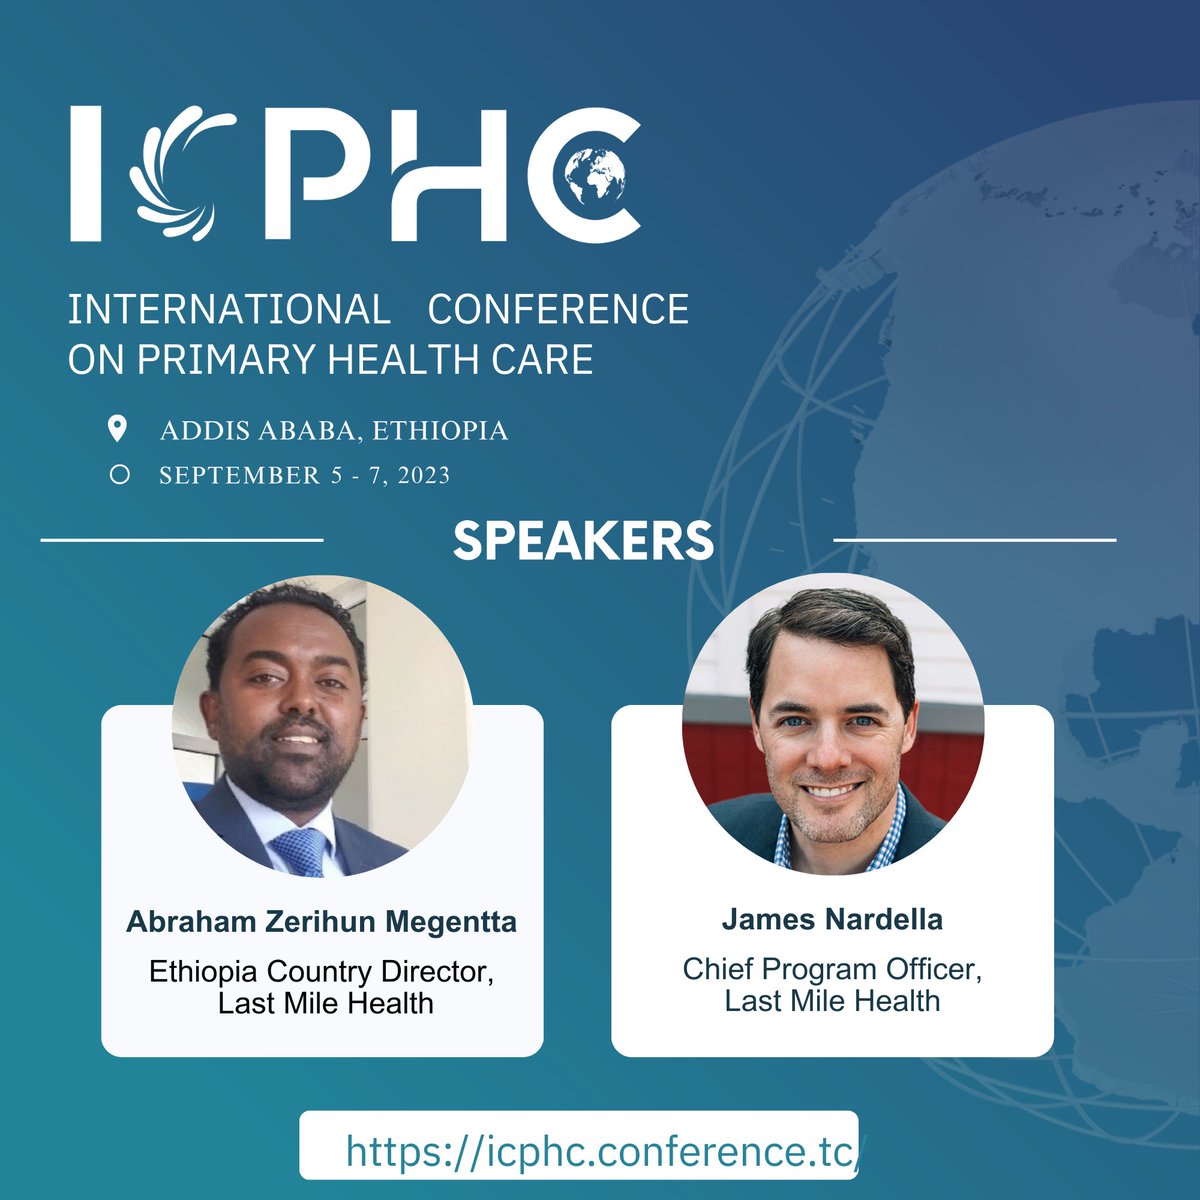 What makes primary healthcare the best investment to drive #HealthForAll? Hear from Last Mile Health's Chief Program Officer, @jamesnardella, at #ICPHC2023 on September 6. Register today: bit.ly/3OuM2og